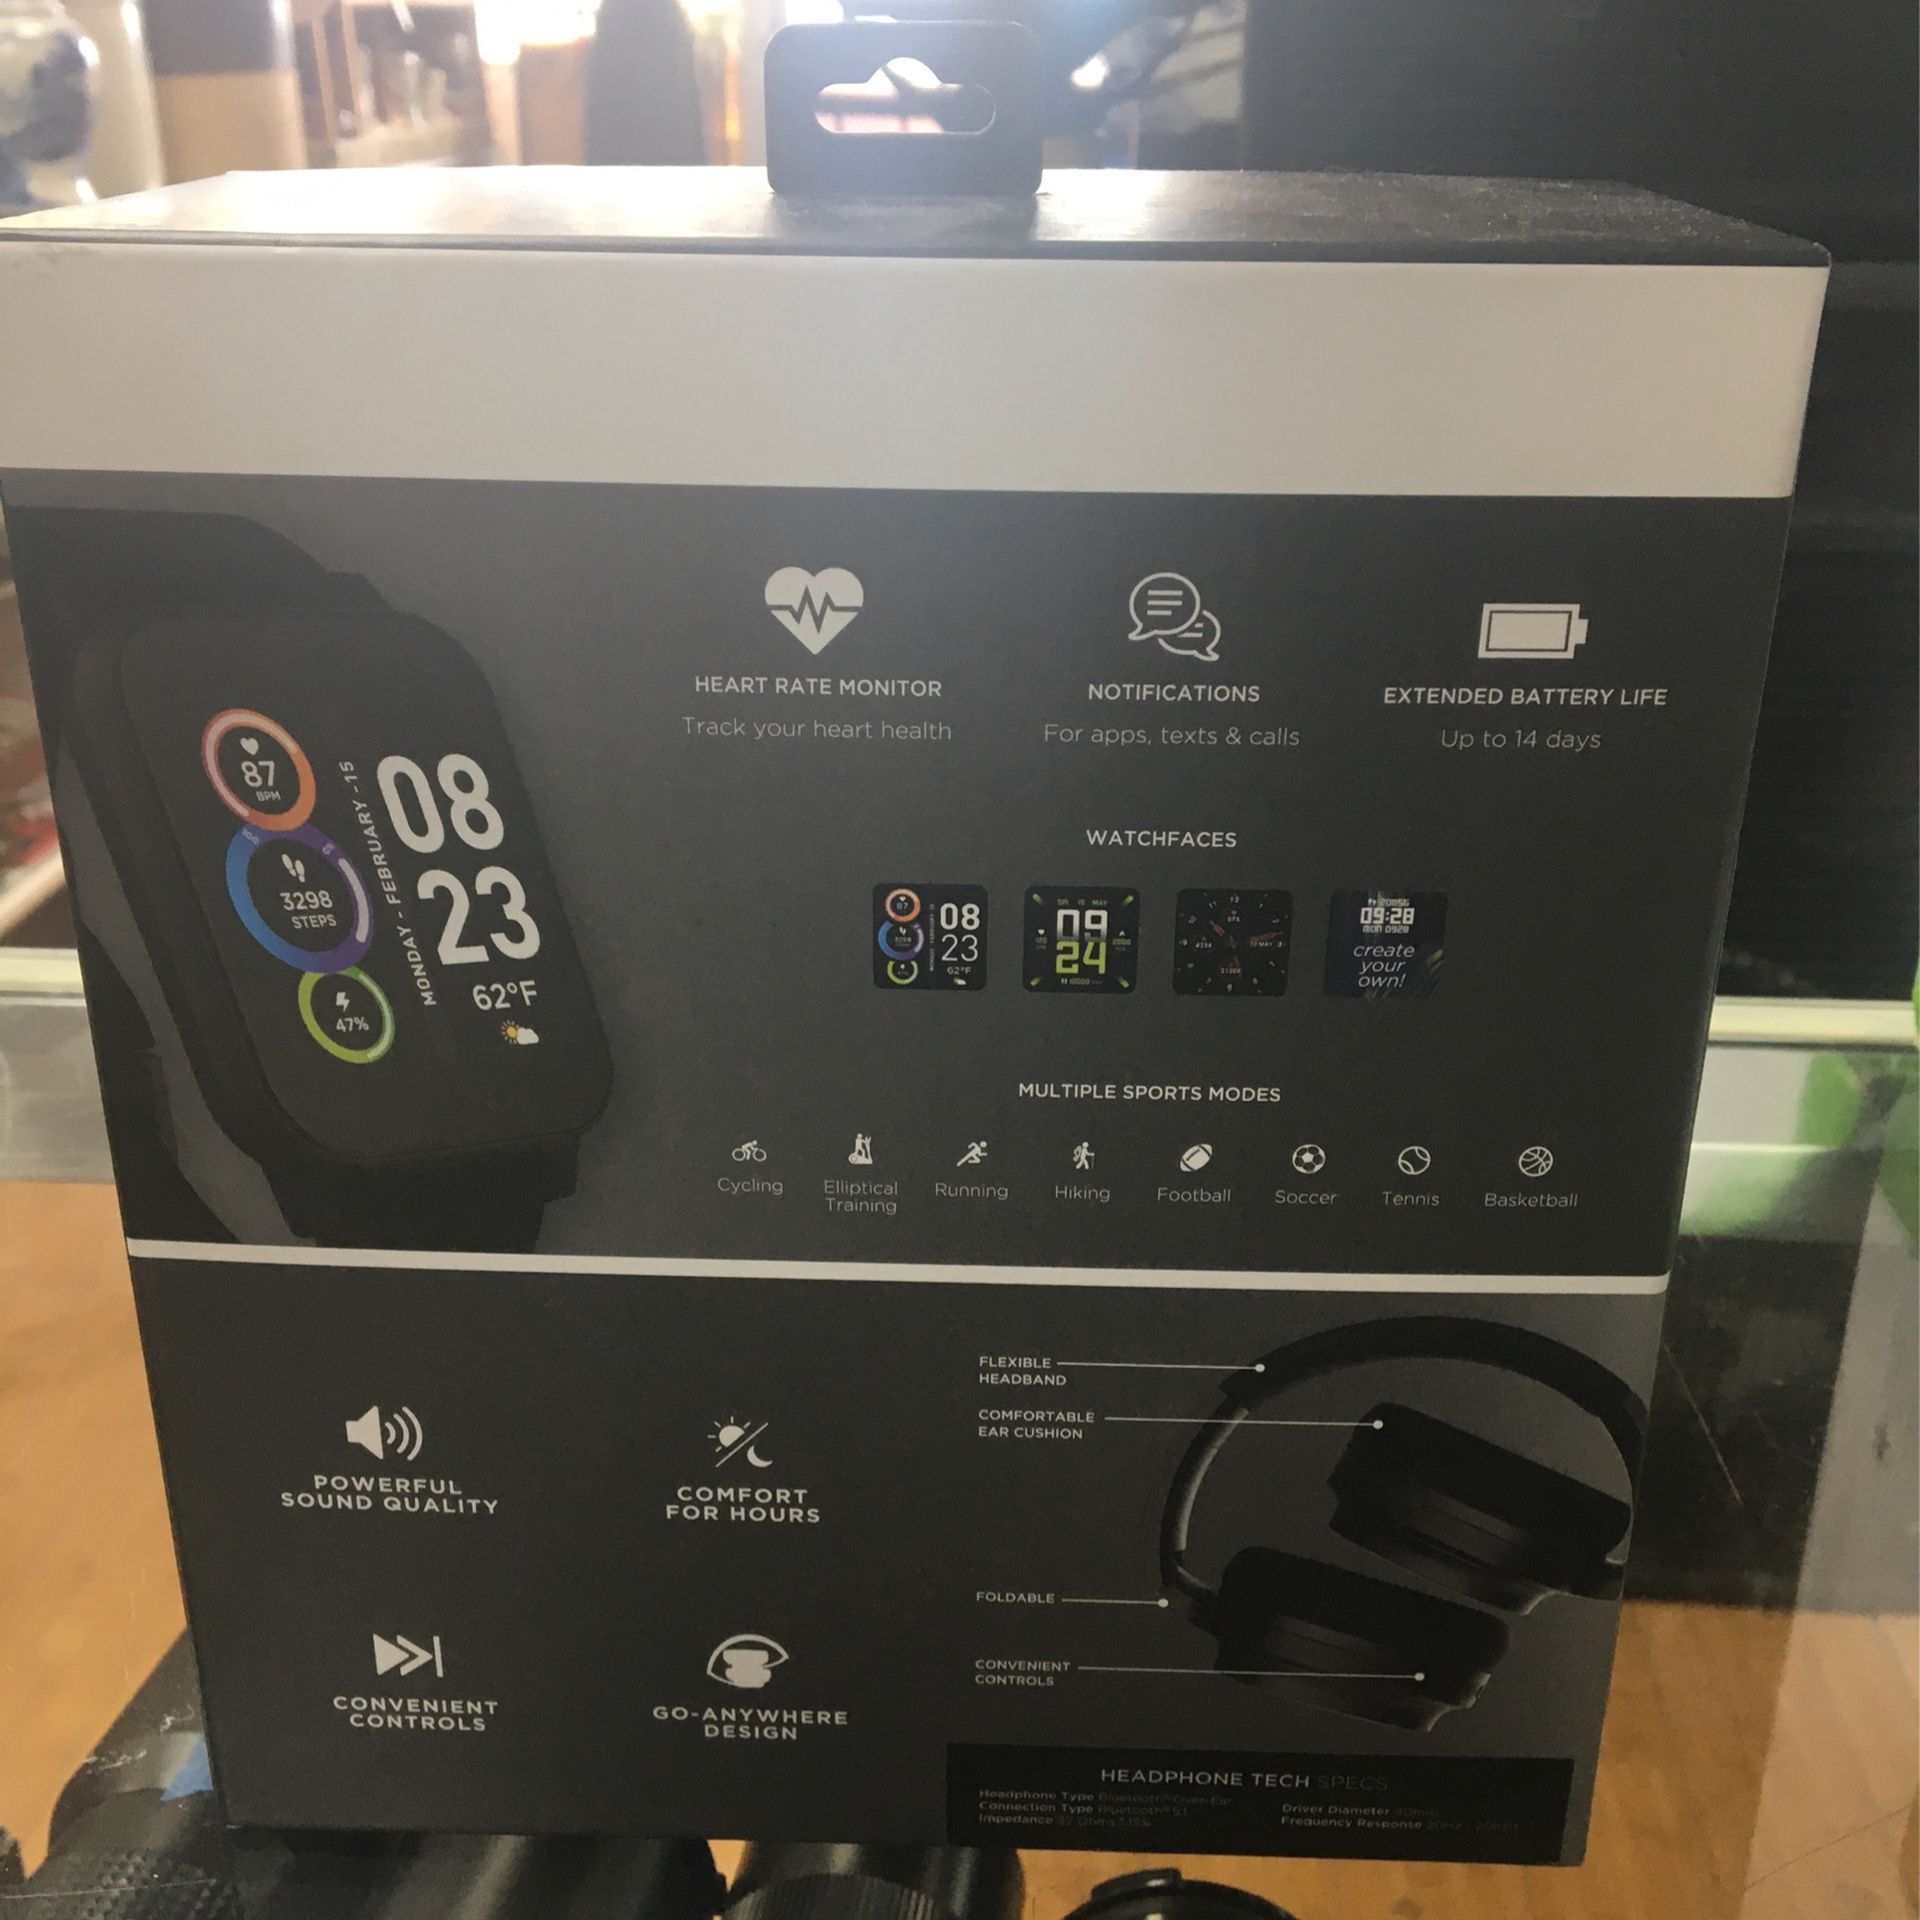 I tech Fusion 2 Smartwatch And Wireless Headphones 